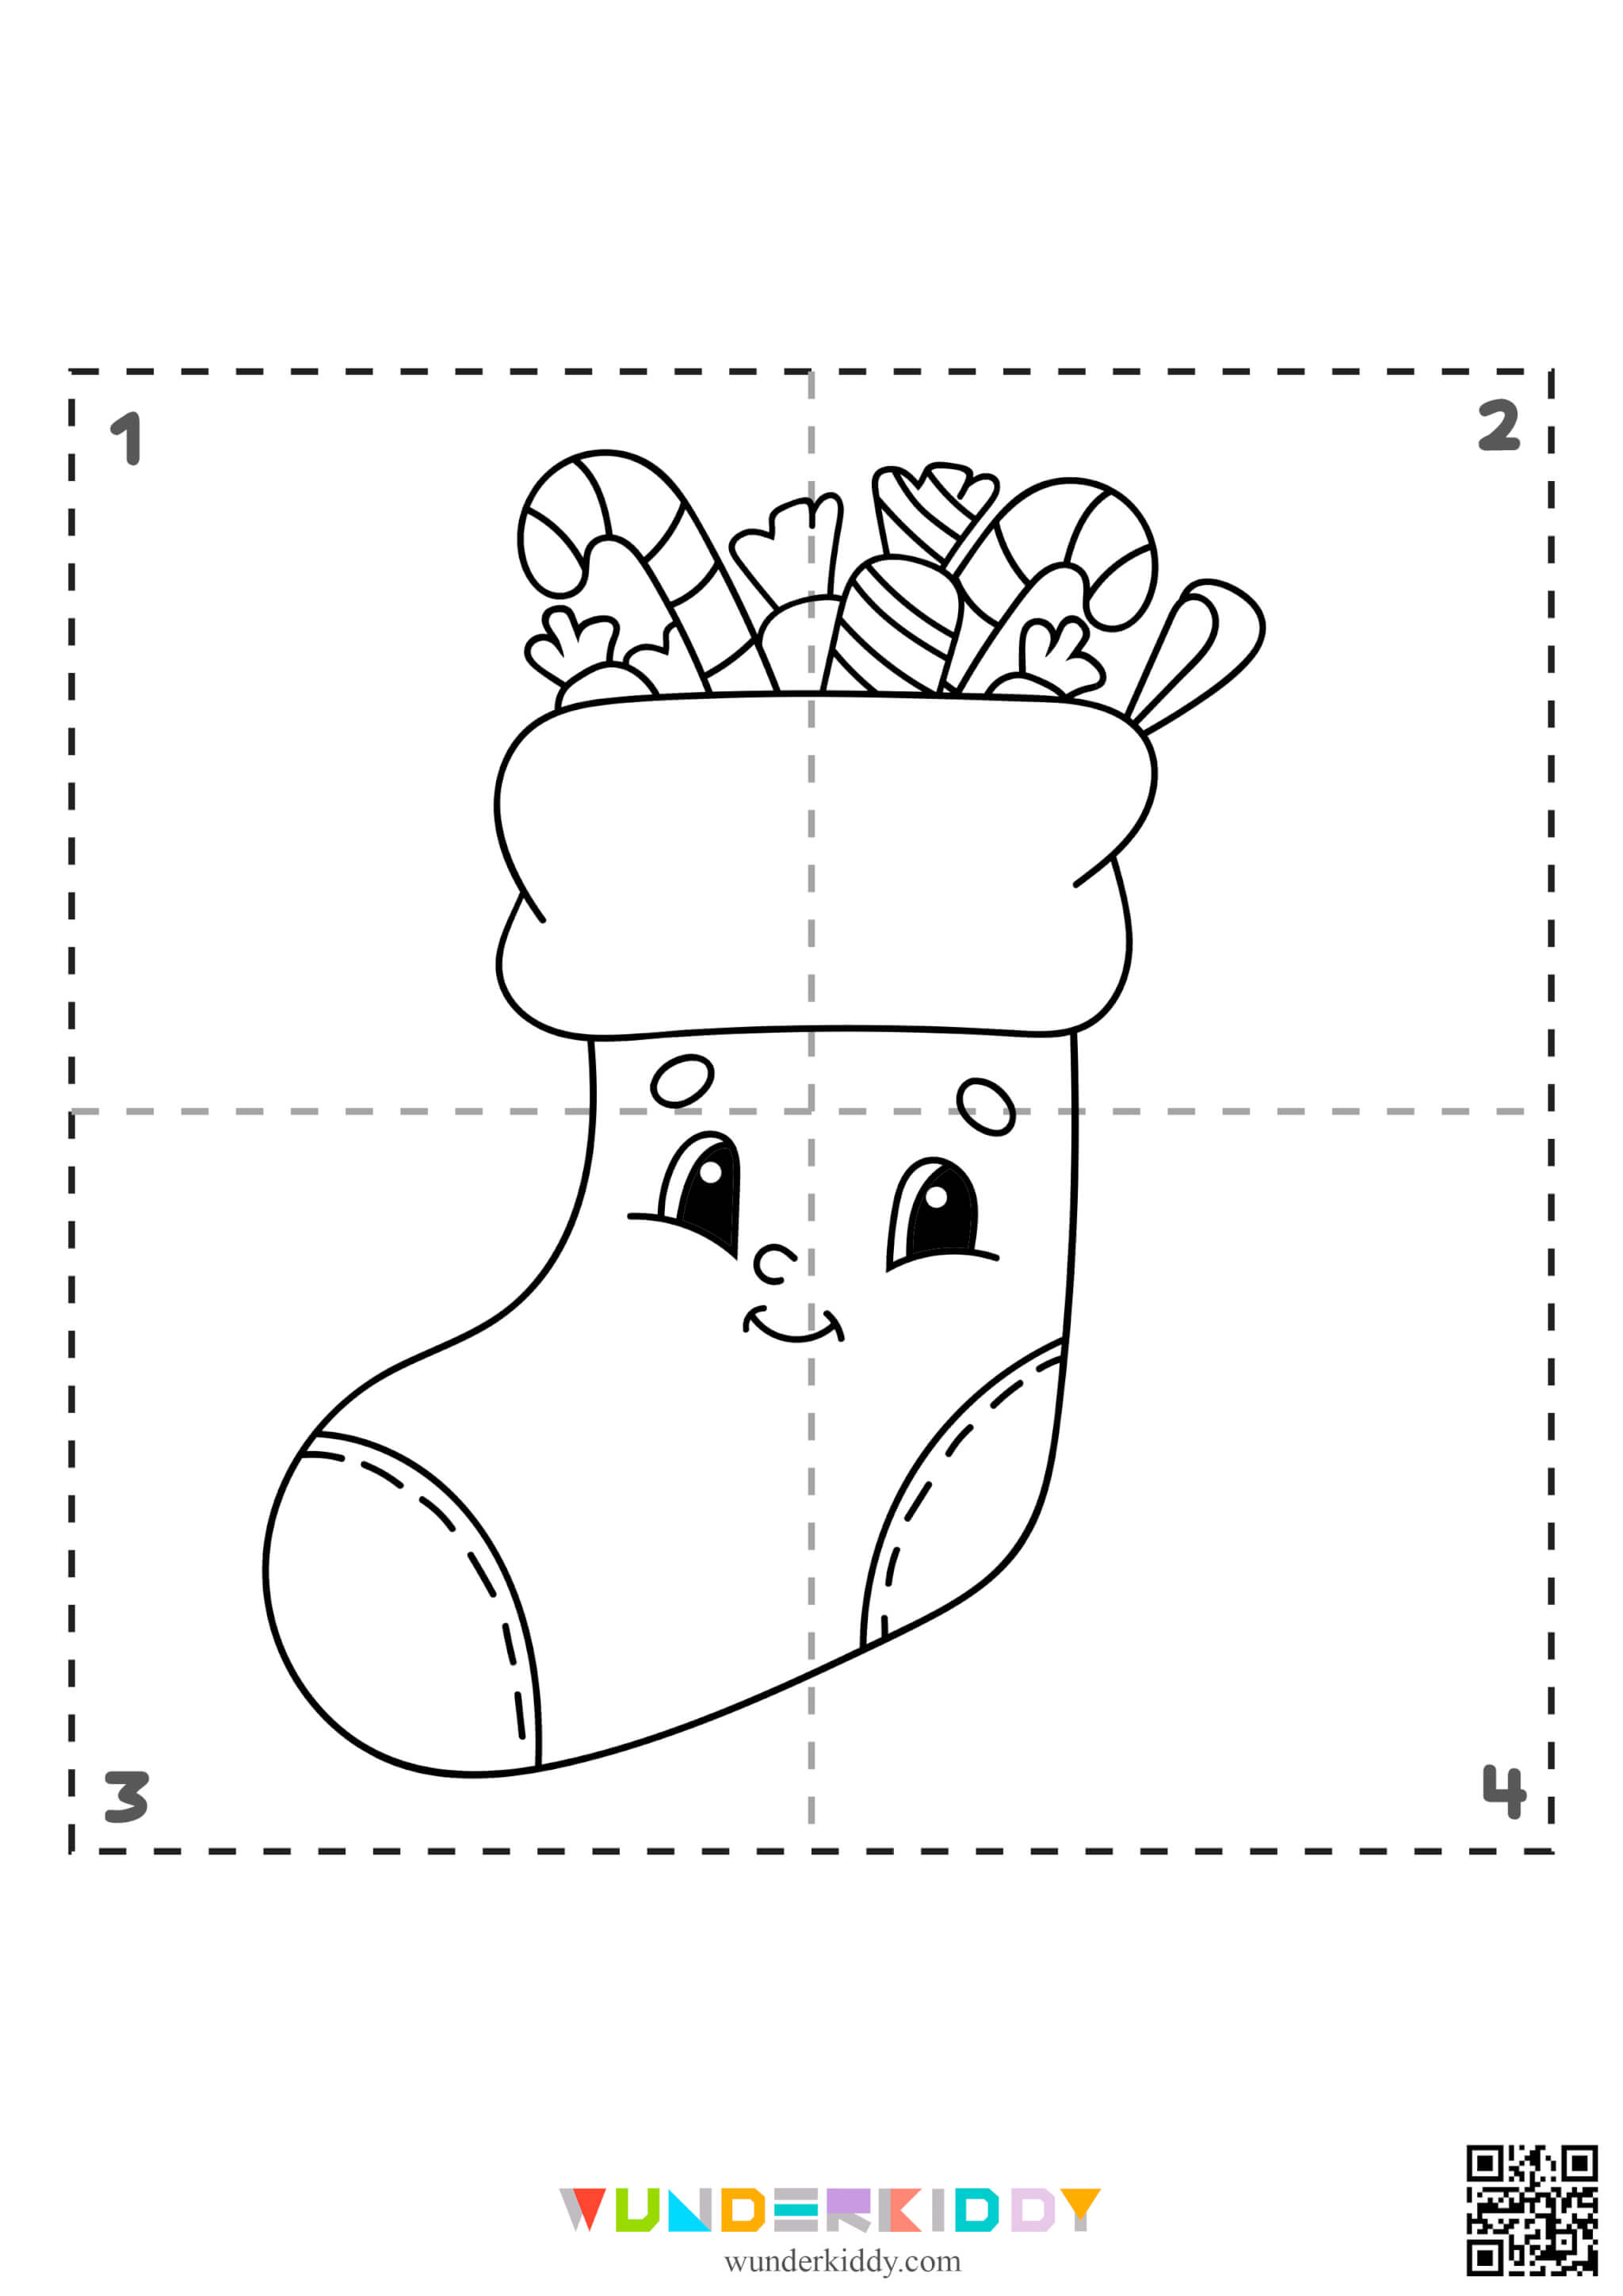 Coloring pages «New Year's Puzzle» - Image 7